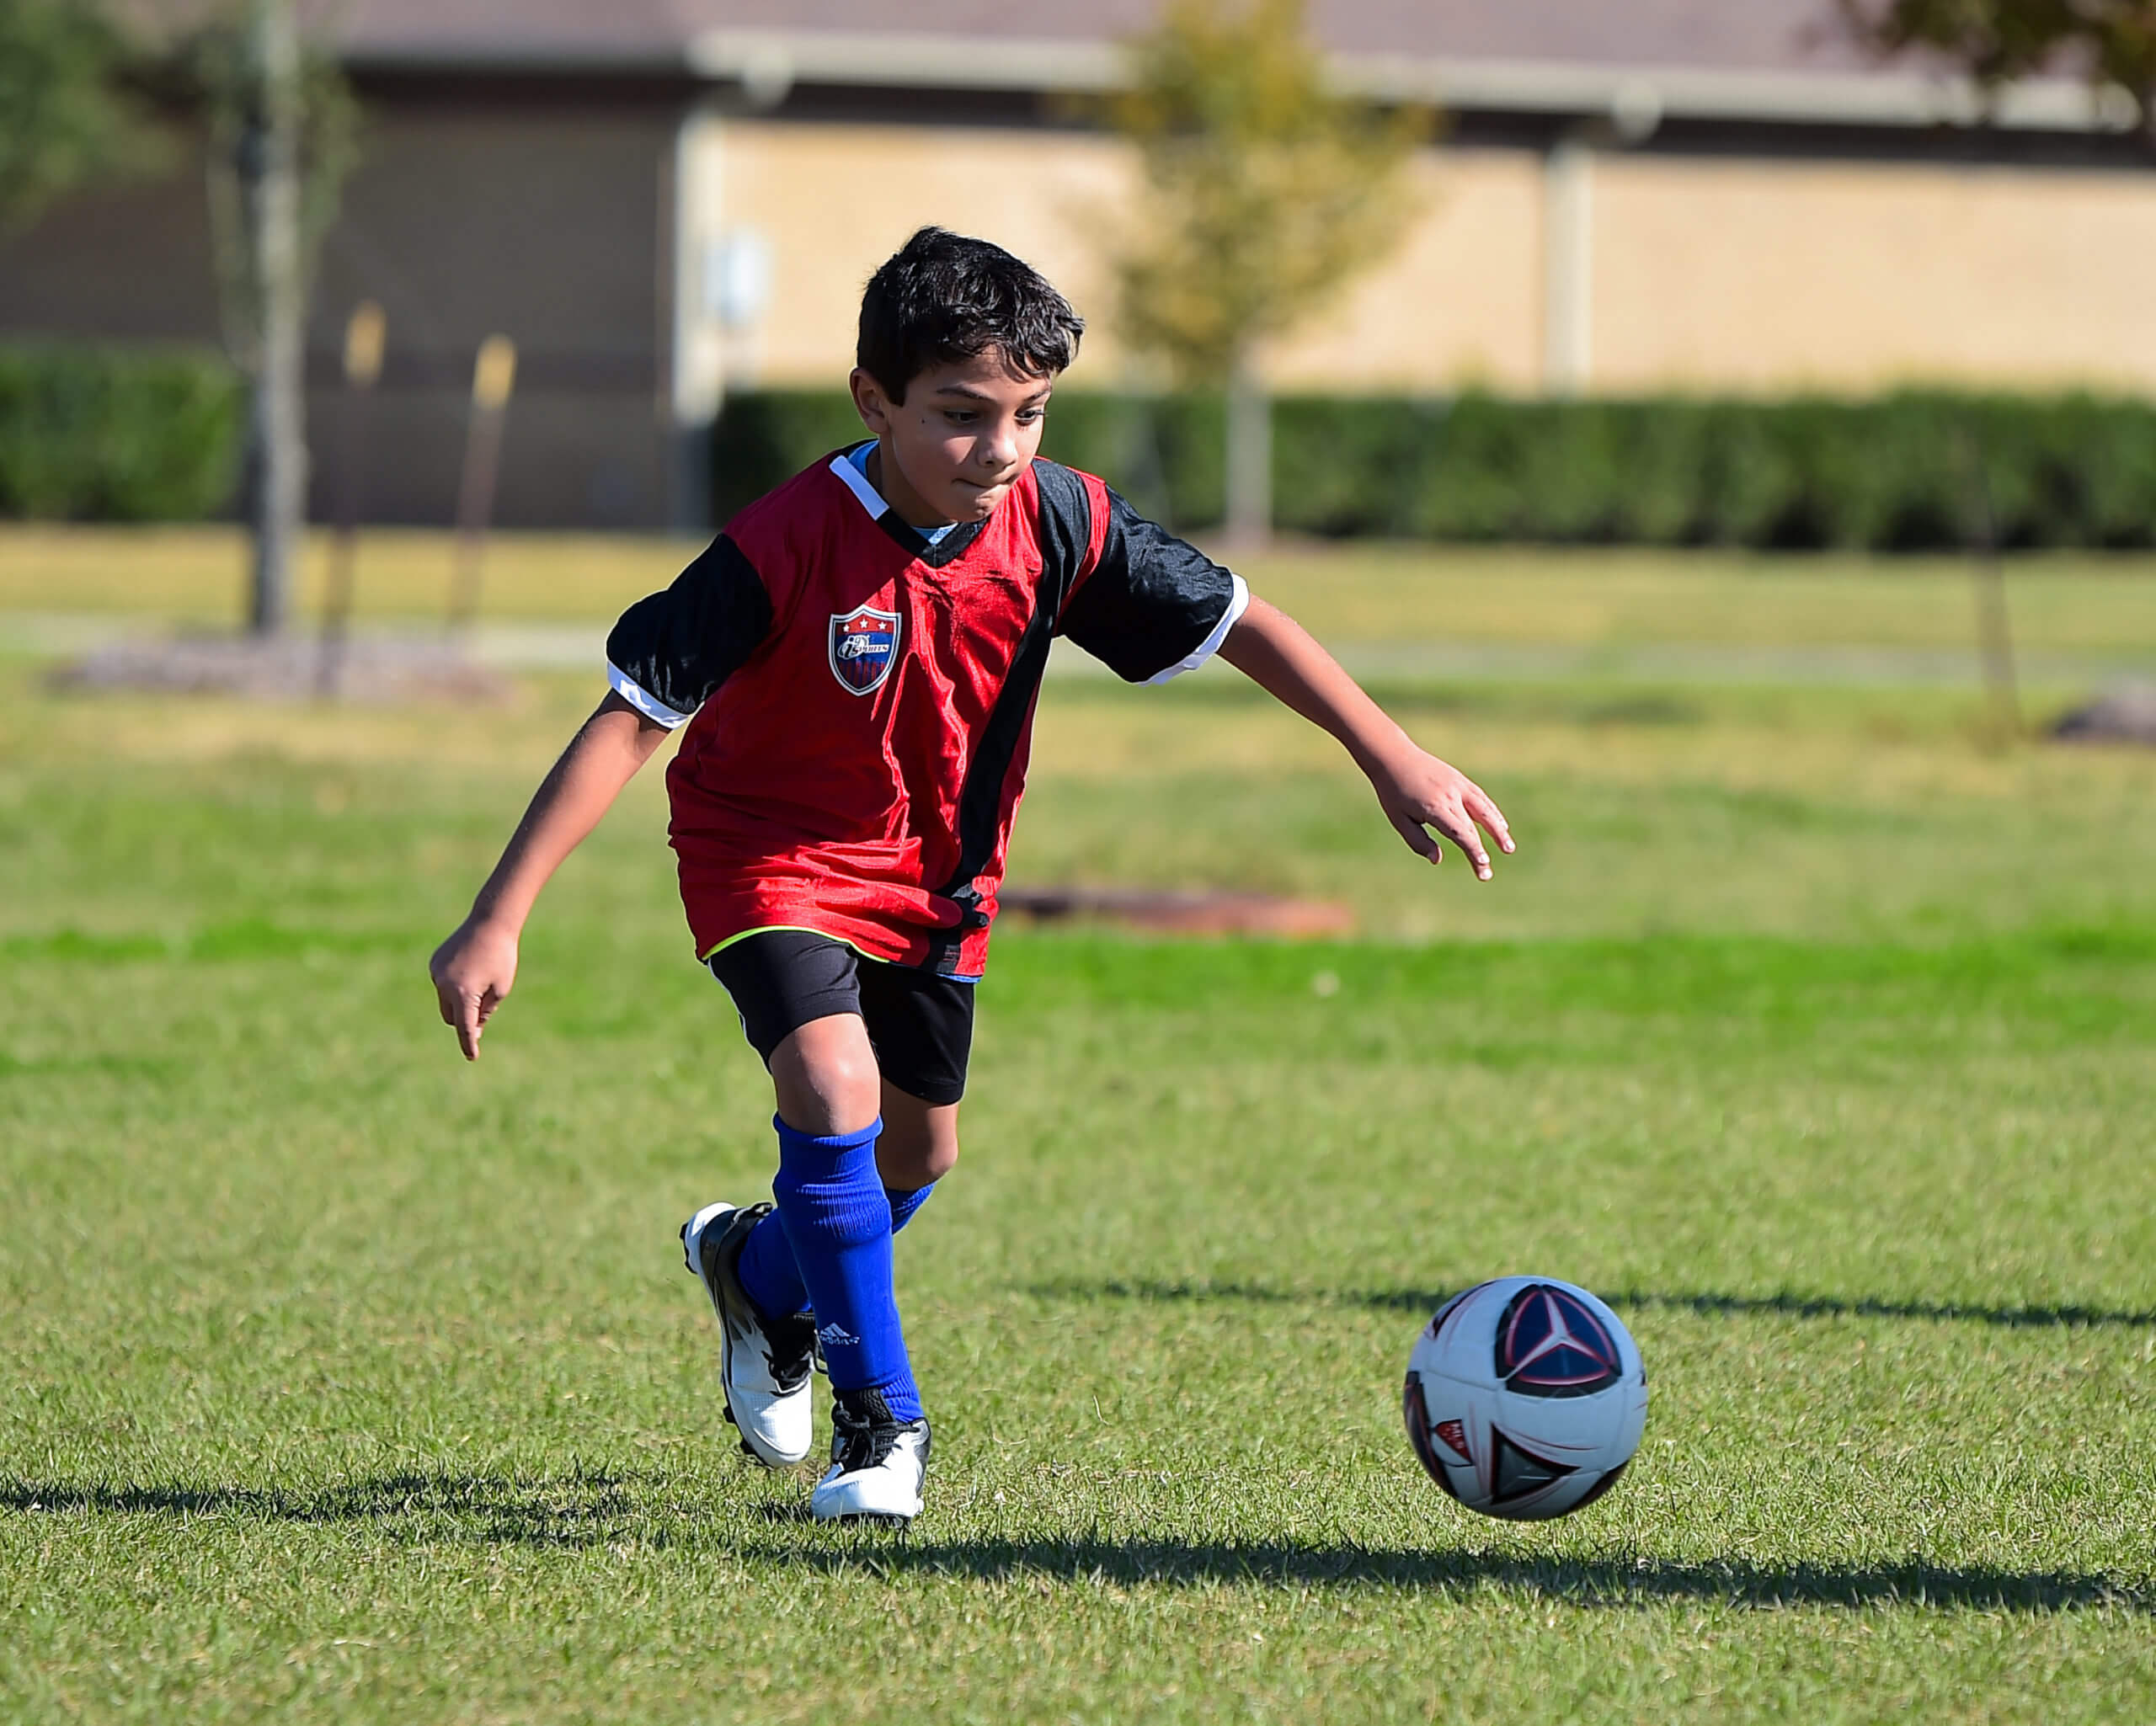 Does i9 Sports hold the key to the future of youth sports?